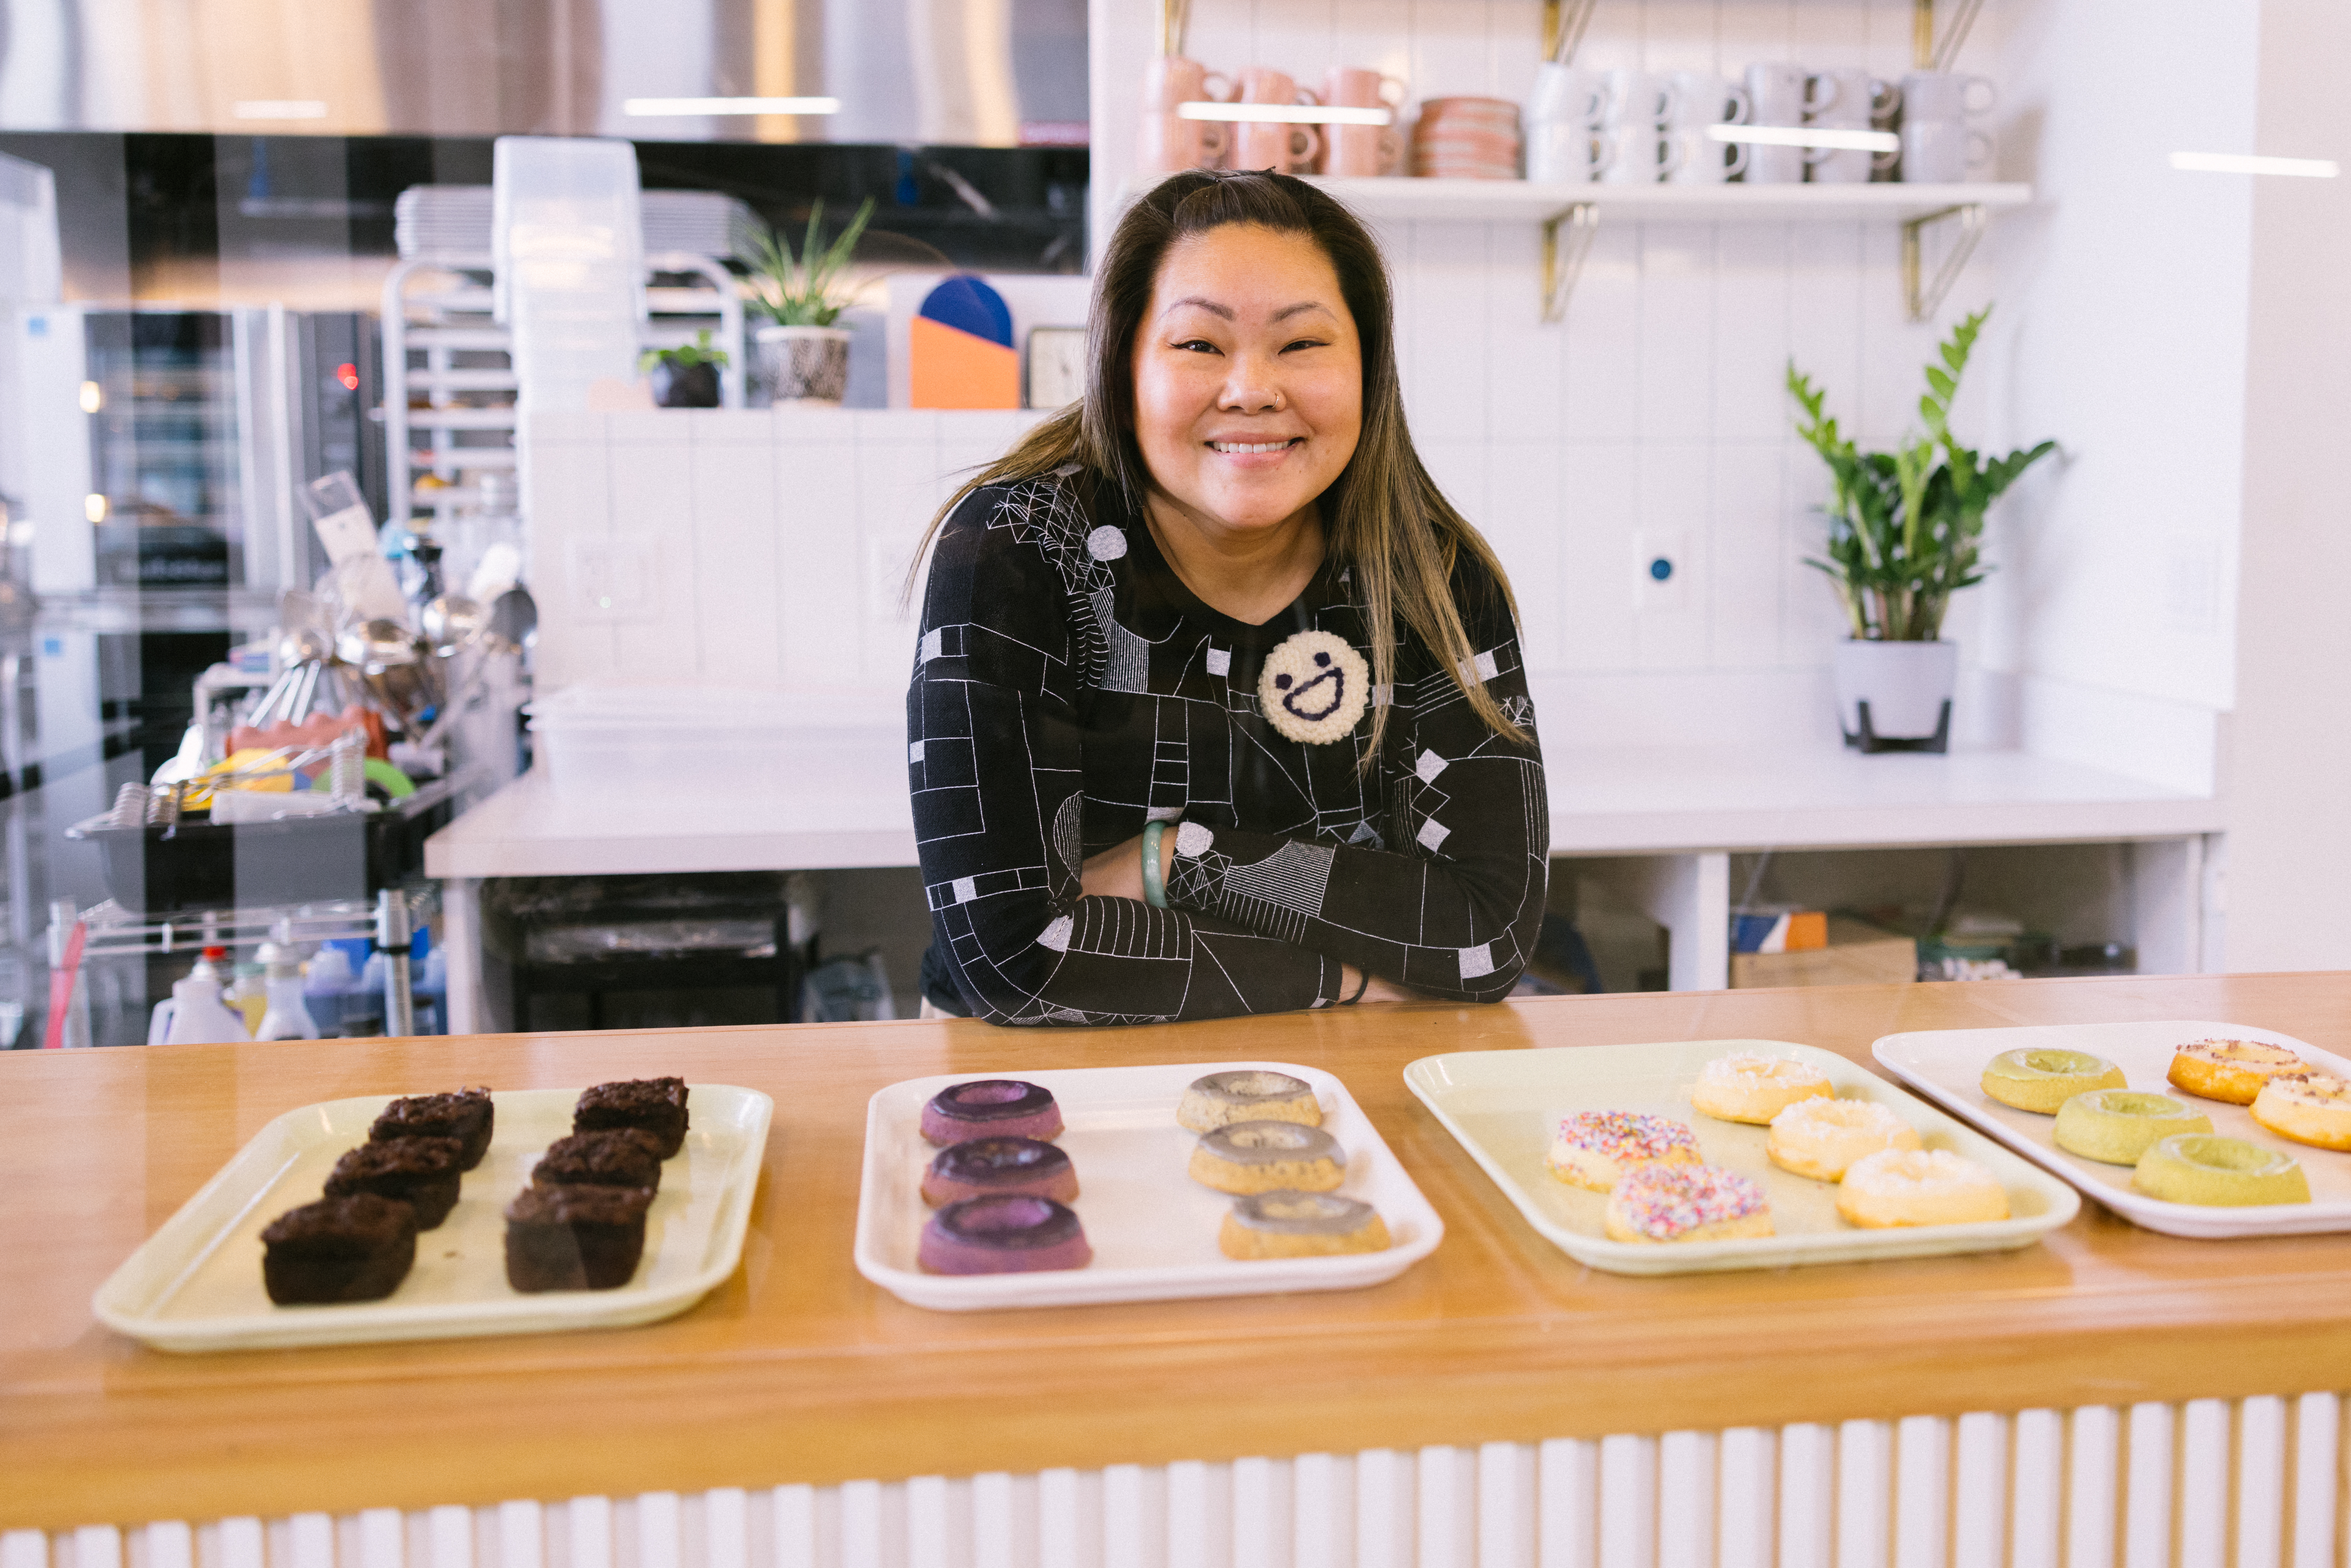 Lisa Nguyen stands in front of the doughnut display at Heyday.